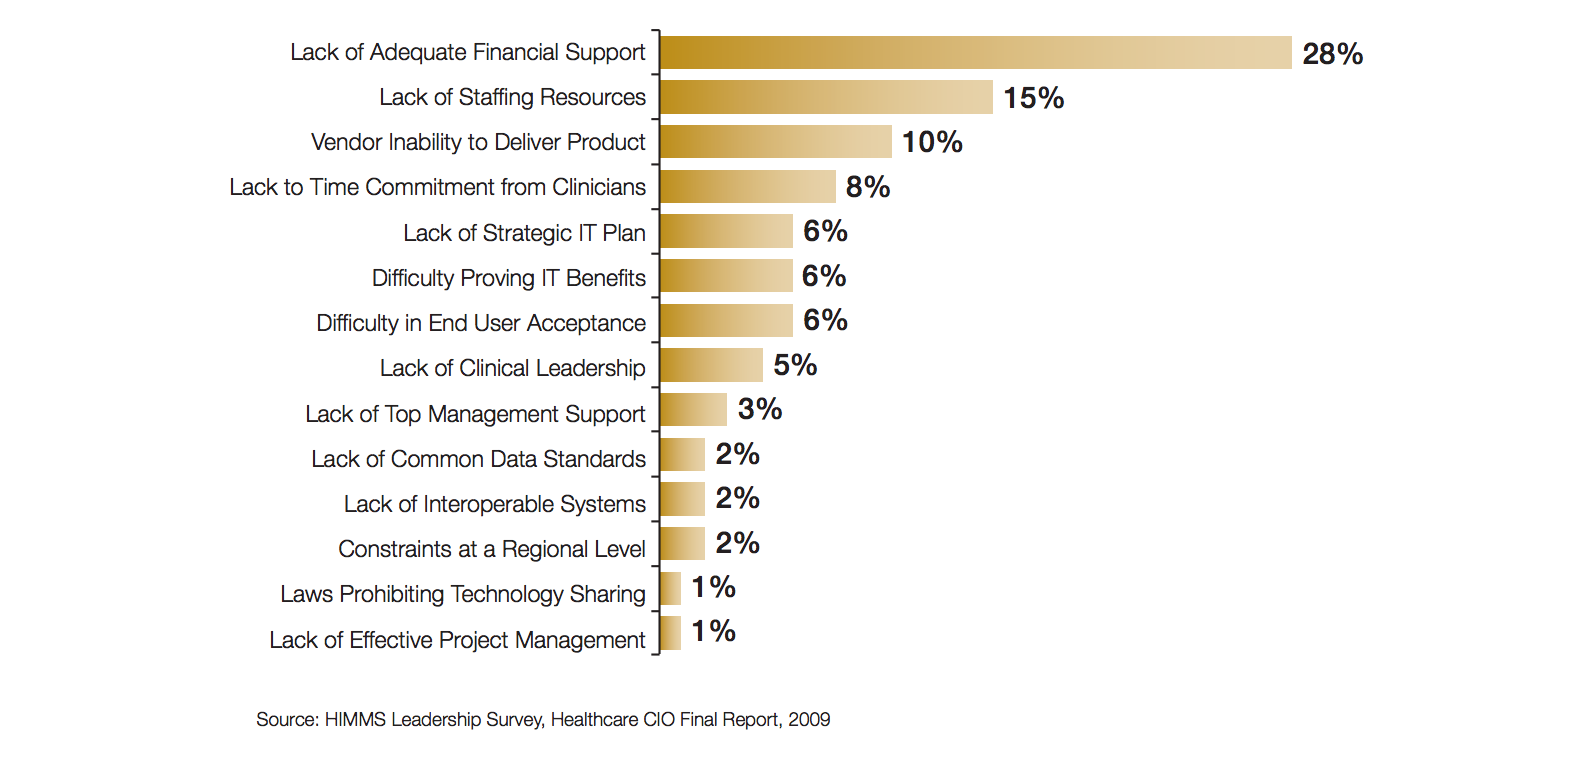 Most significant barriers to implementing wireless within healthcare